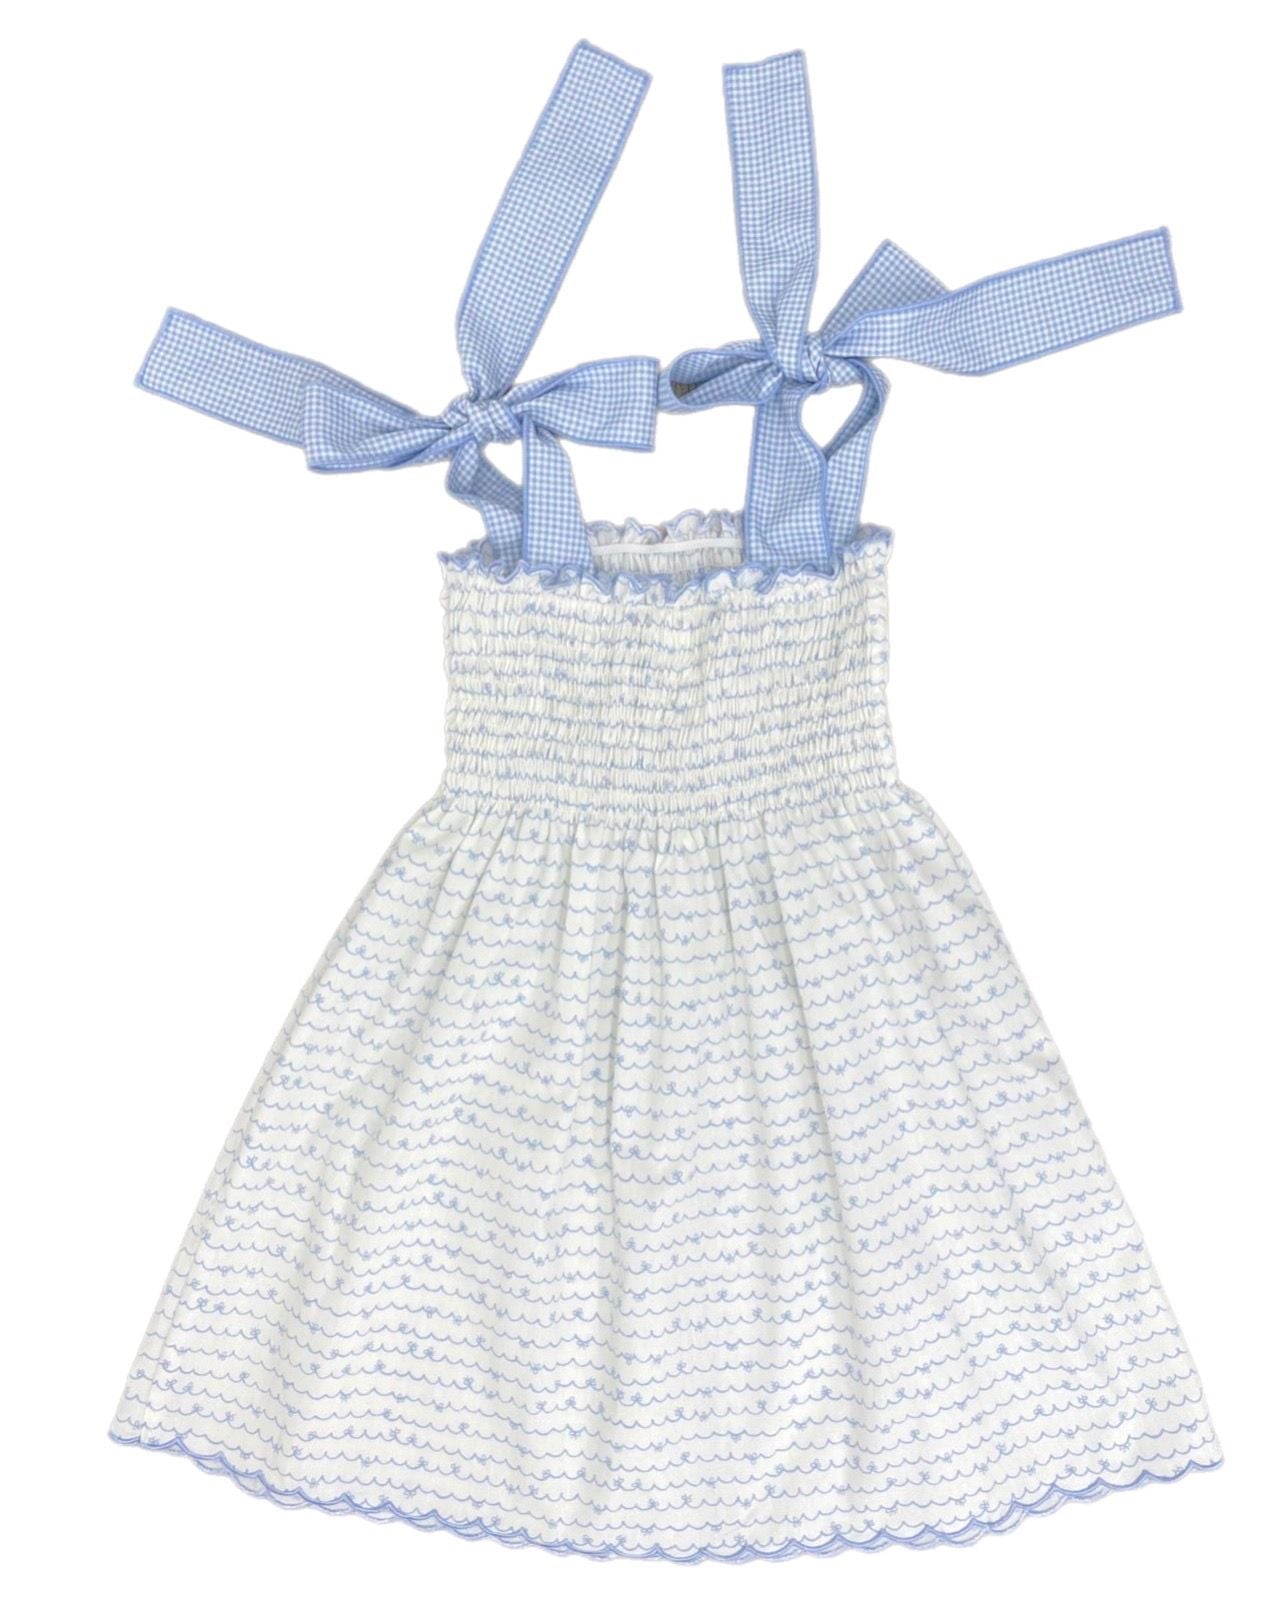 BAILEY DRESS - BLUE BOWS W/BLUE GINGHAM TIES